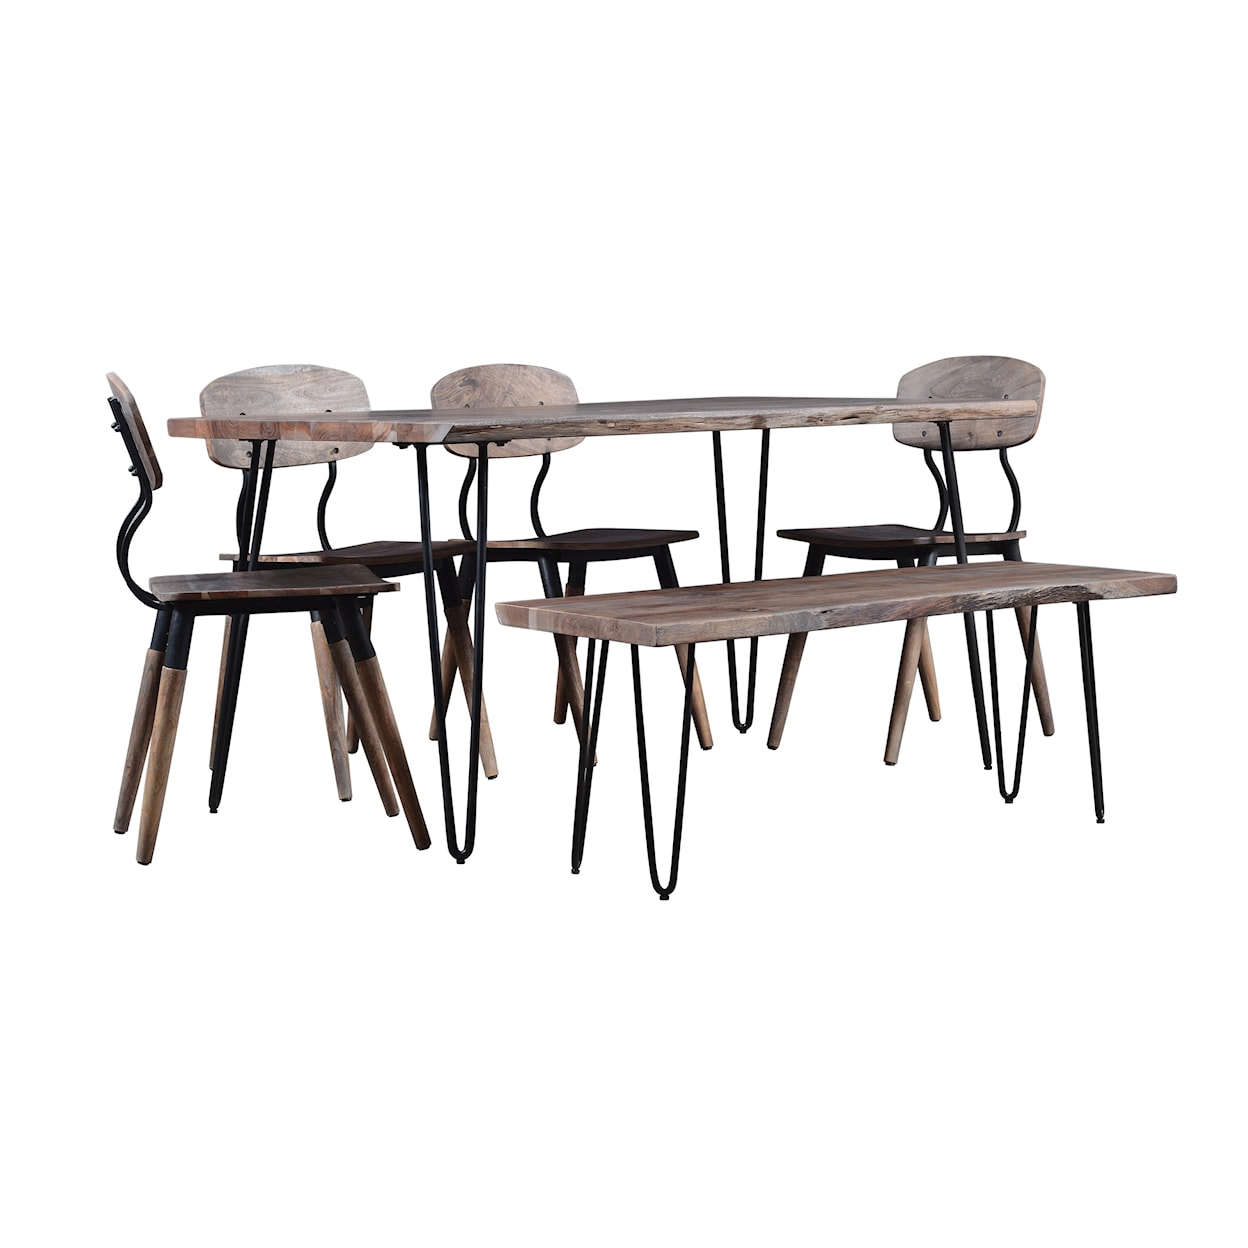 VFM Signature Nature's Edge 60" Dining Table with 4 Chairs and Bench